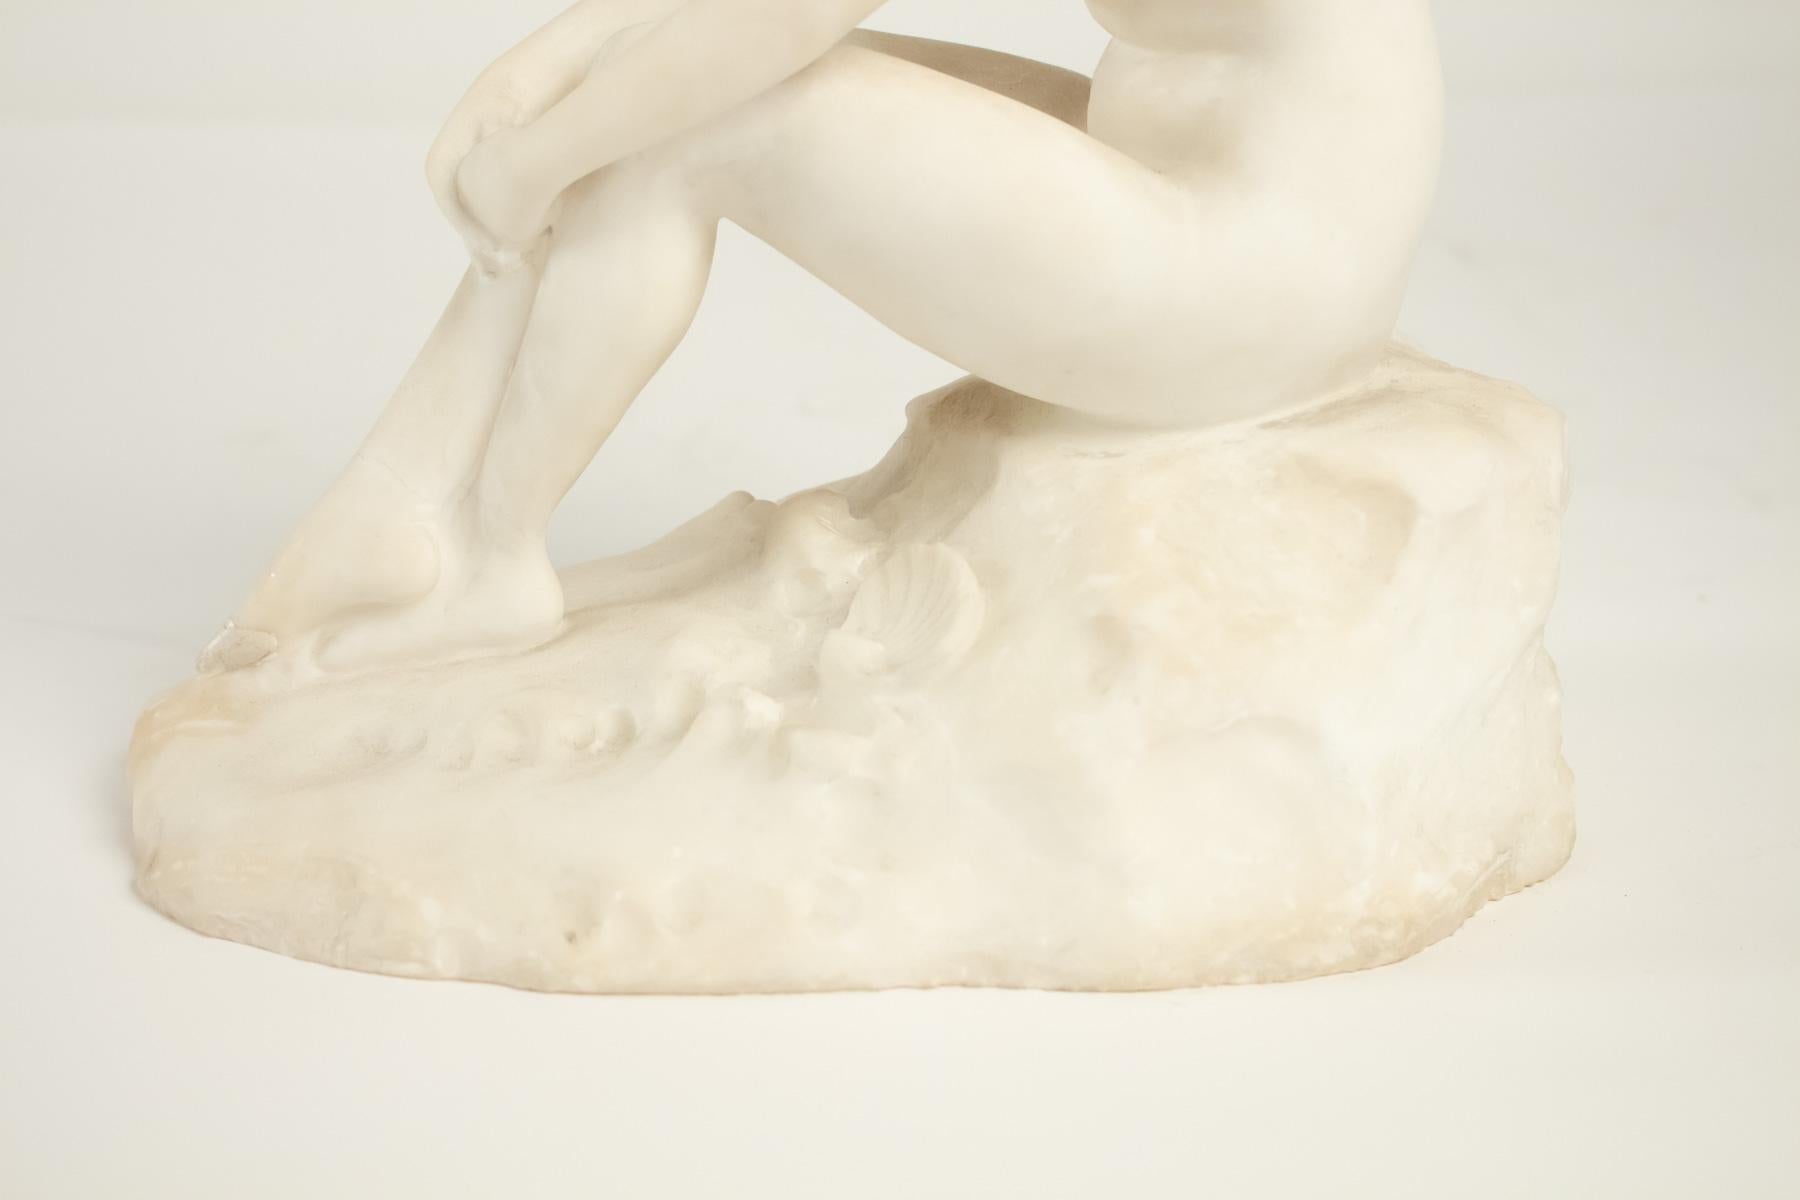 Romantic Marble Sculpture, 1900, Representing a Girl on a Rock